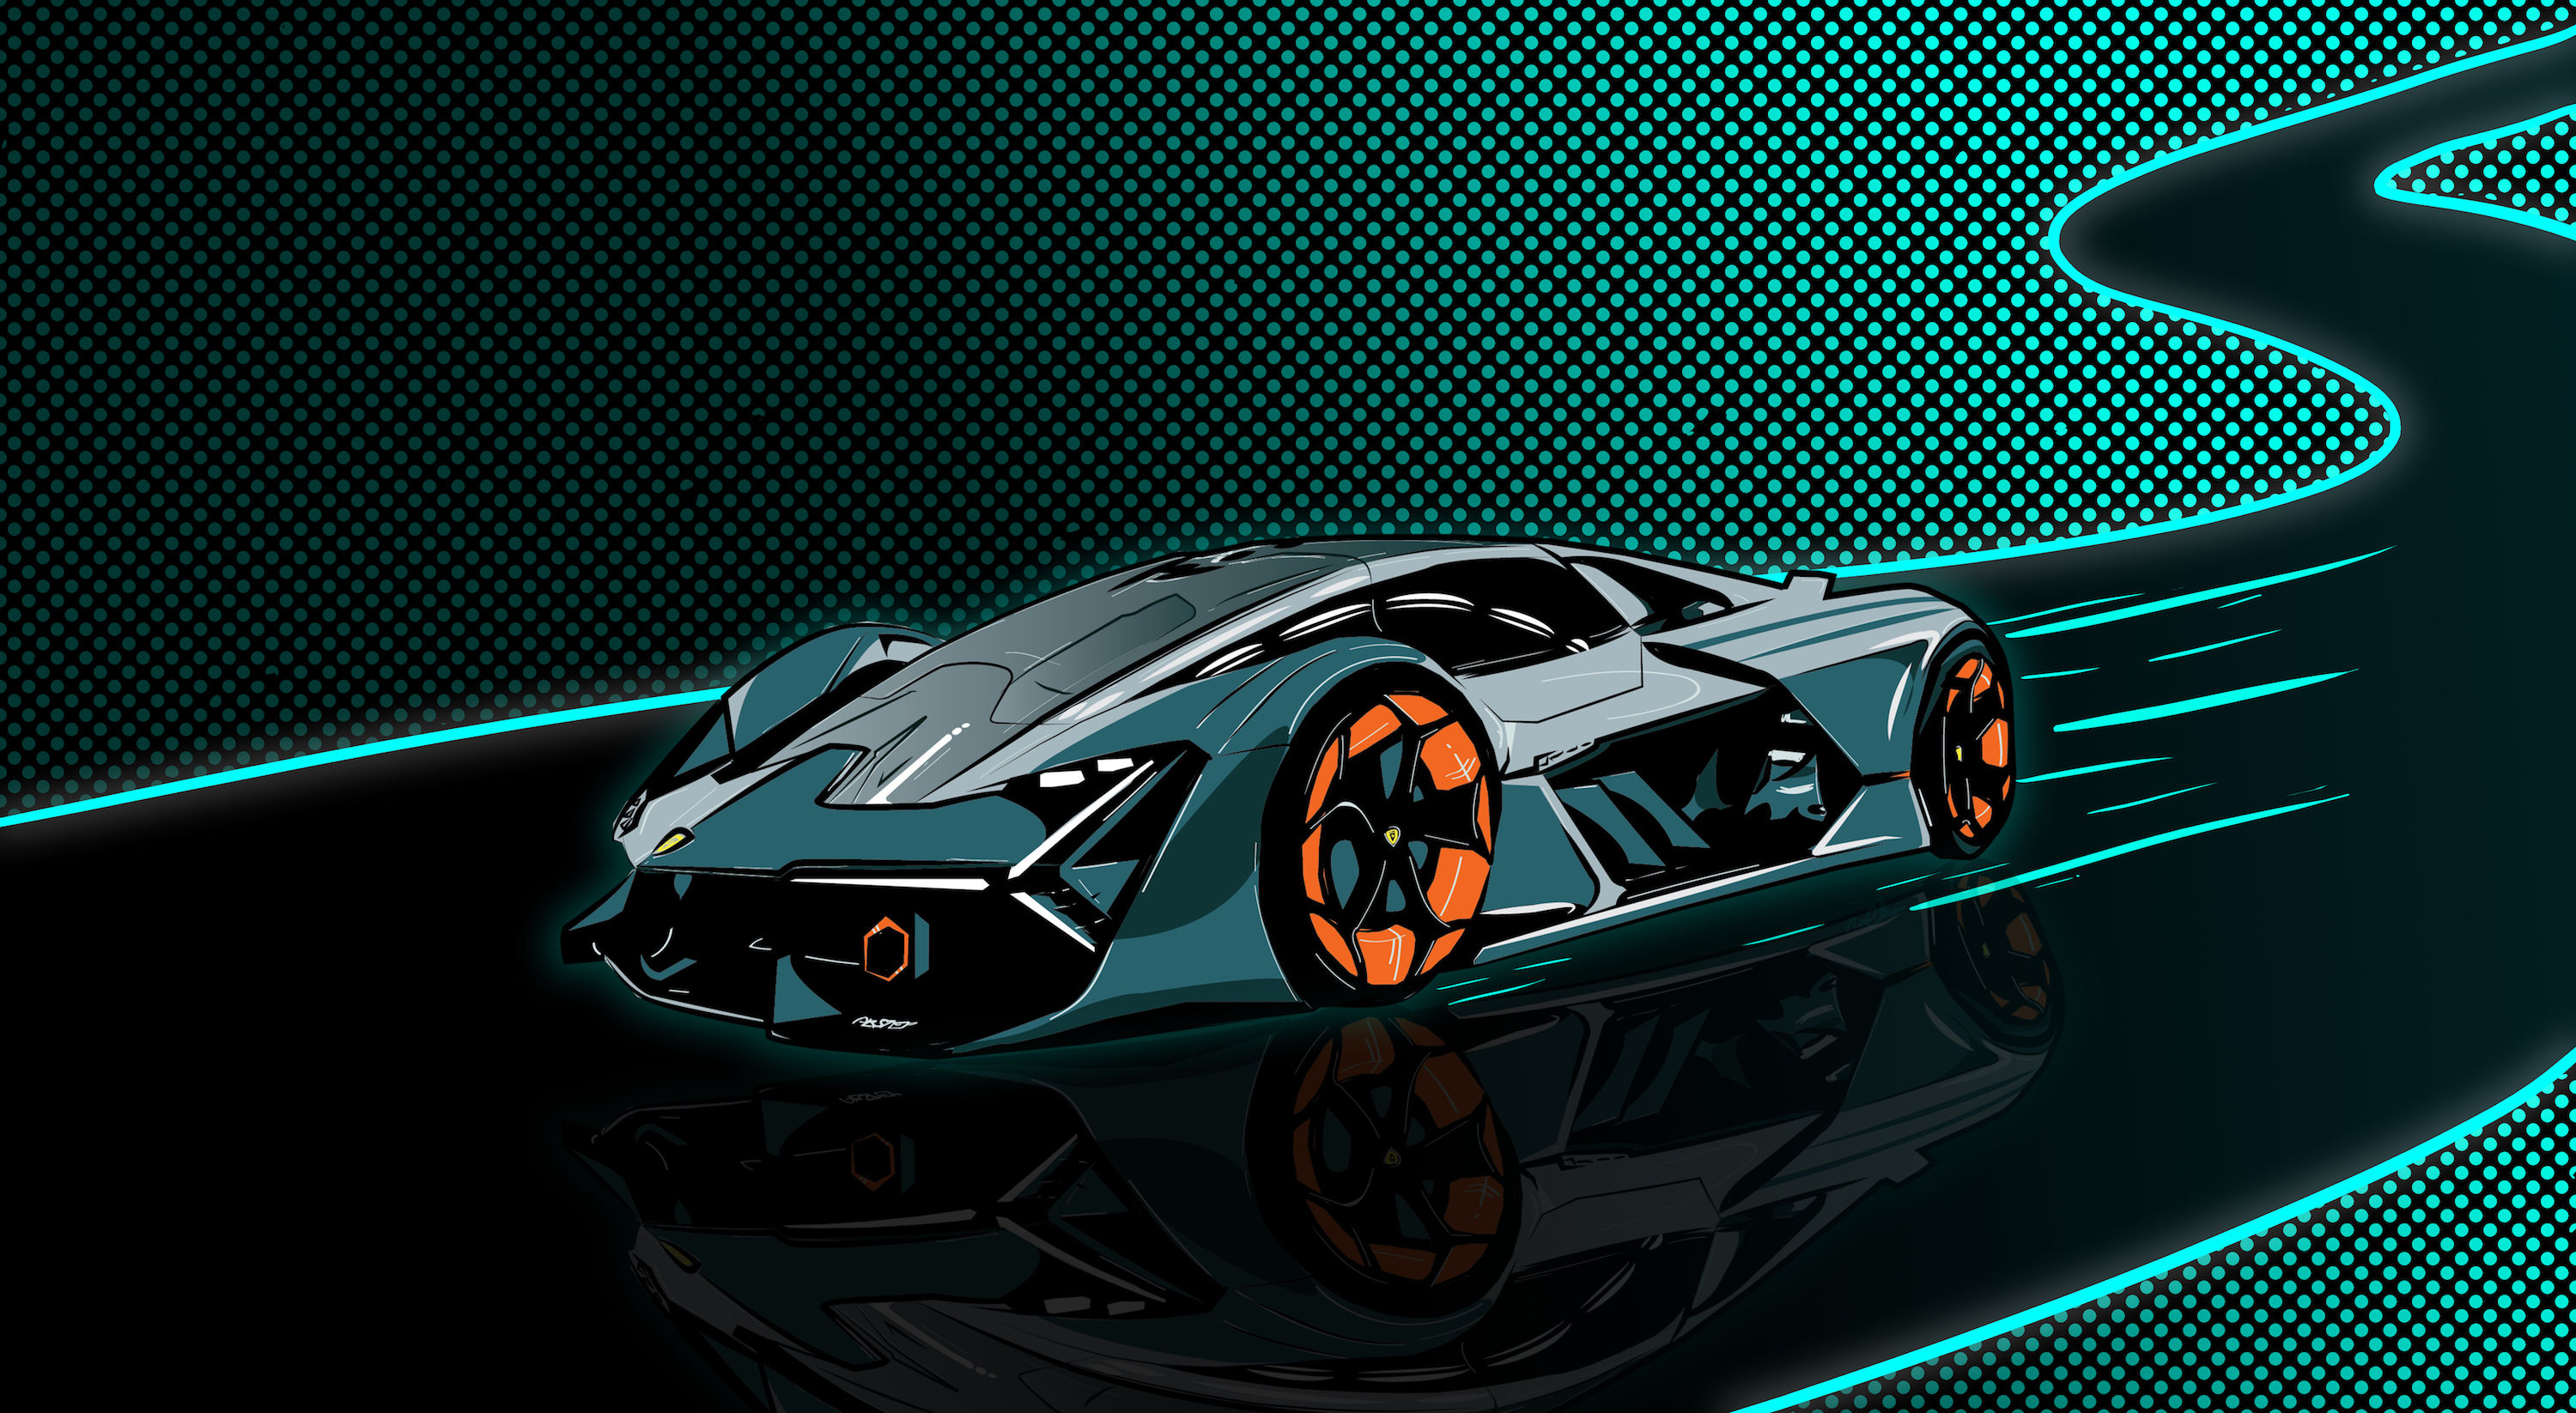 Everything to know about the Terzo Millennio, Lamborghini’s wild all-electric concept